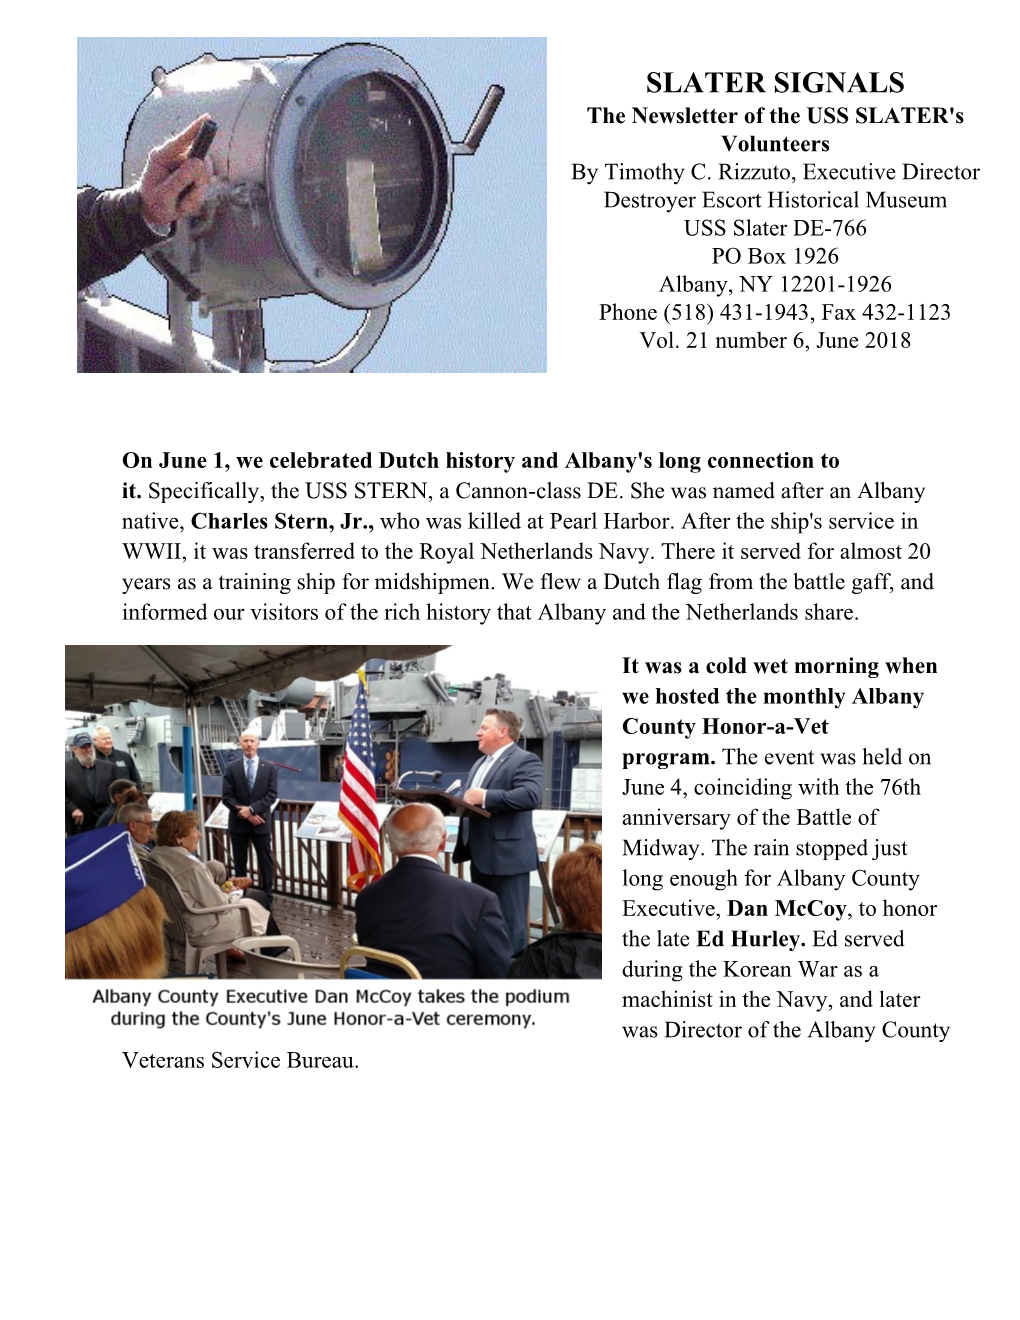 Timothy C. Rizzuto, Executive Director Destroyer Escort Historical Museum R USS Slater DE-766 PO Box 1926 Albany, NY 12201-1926 Phone (518) 431-1943, Fax 432-1123 Vol